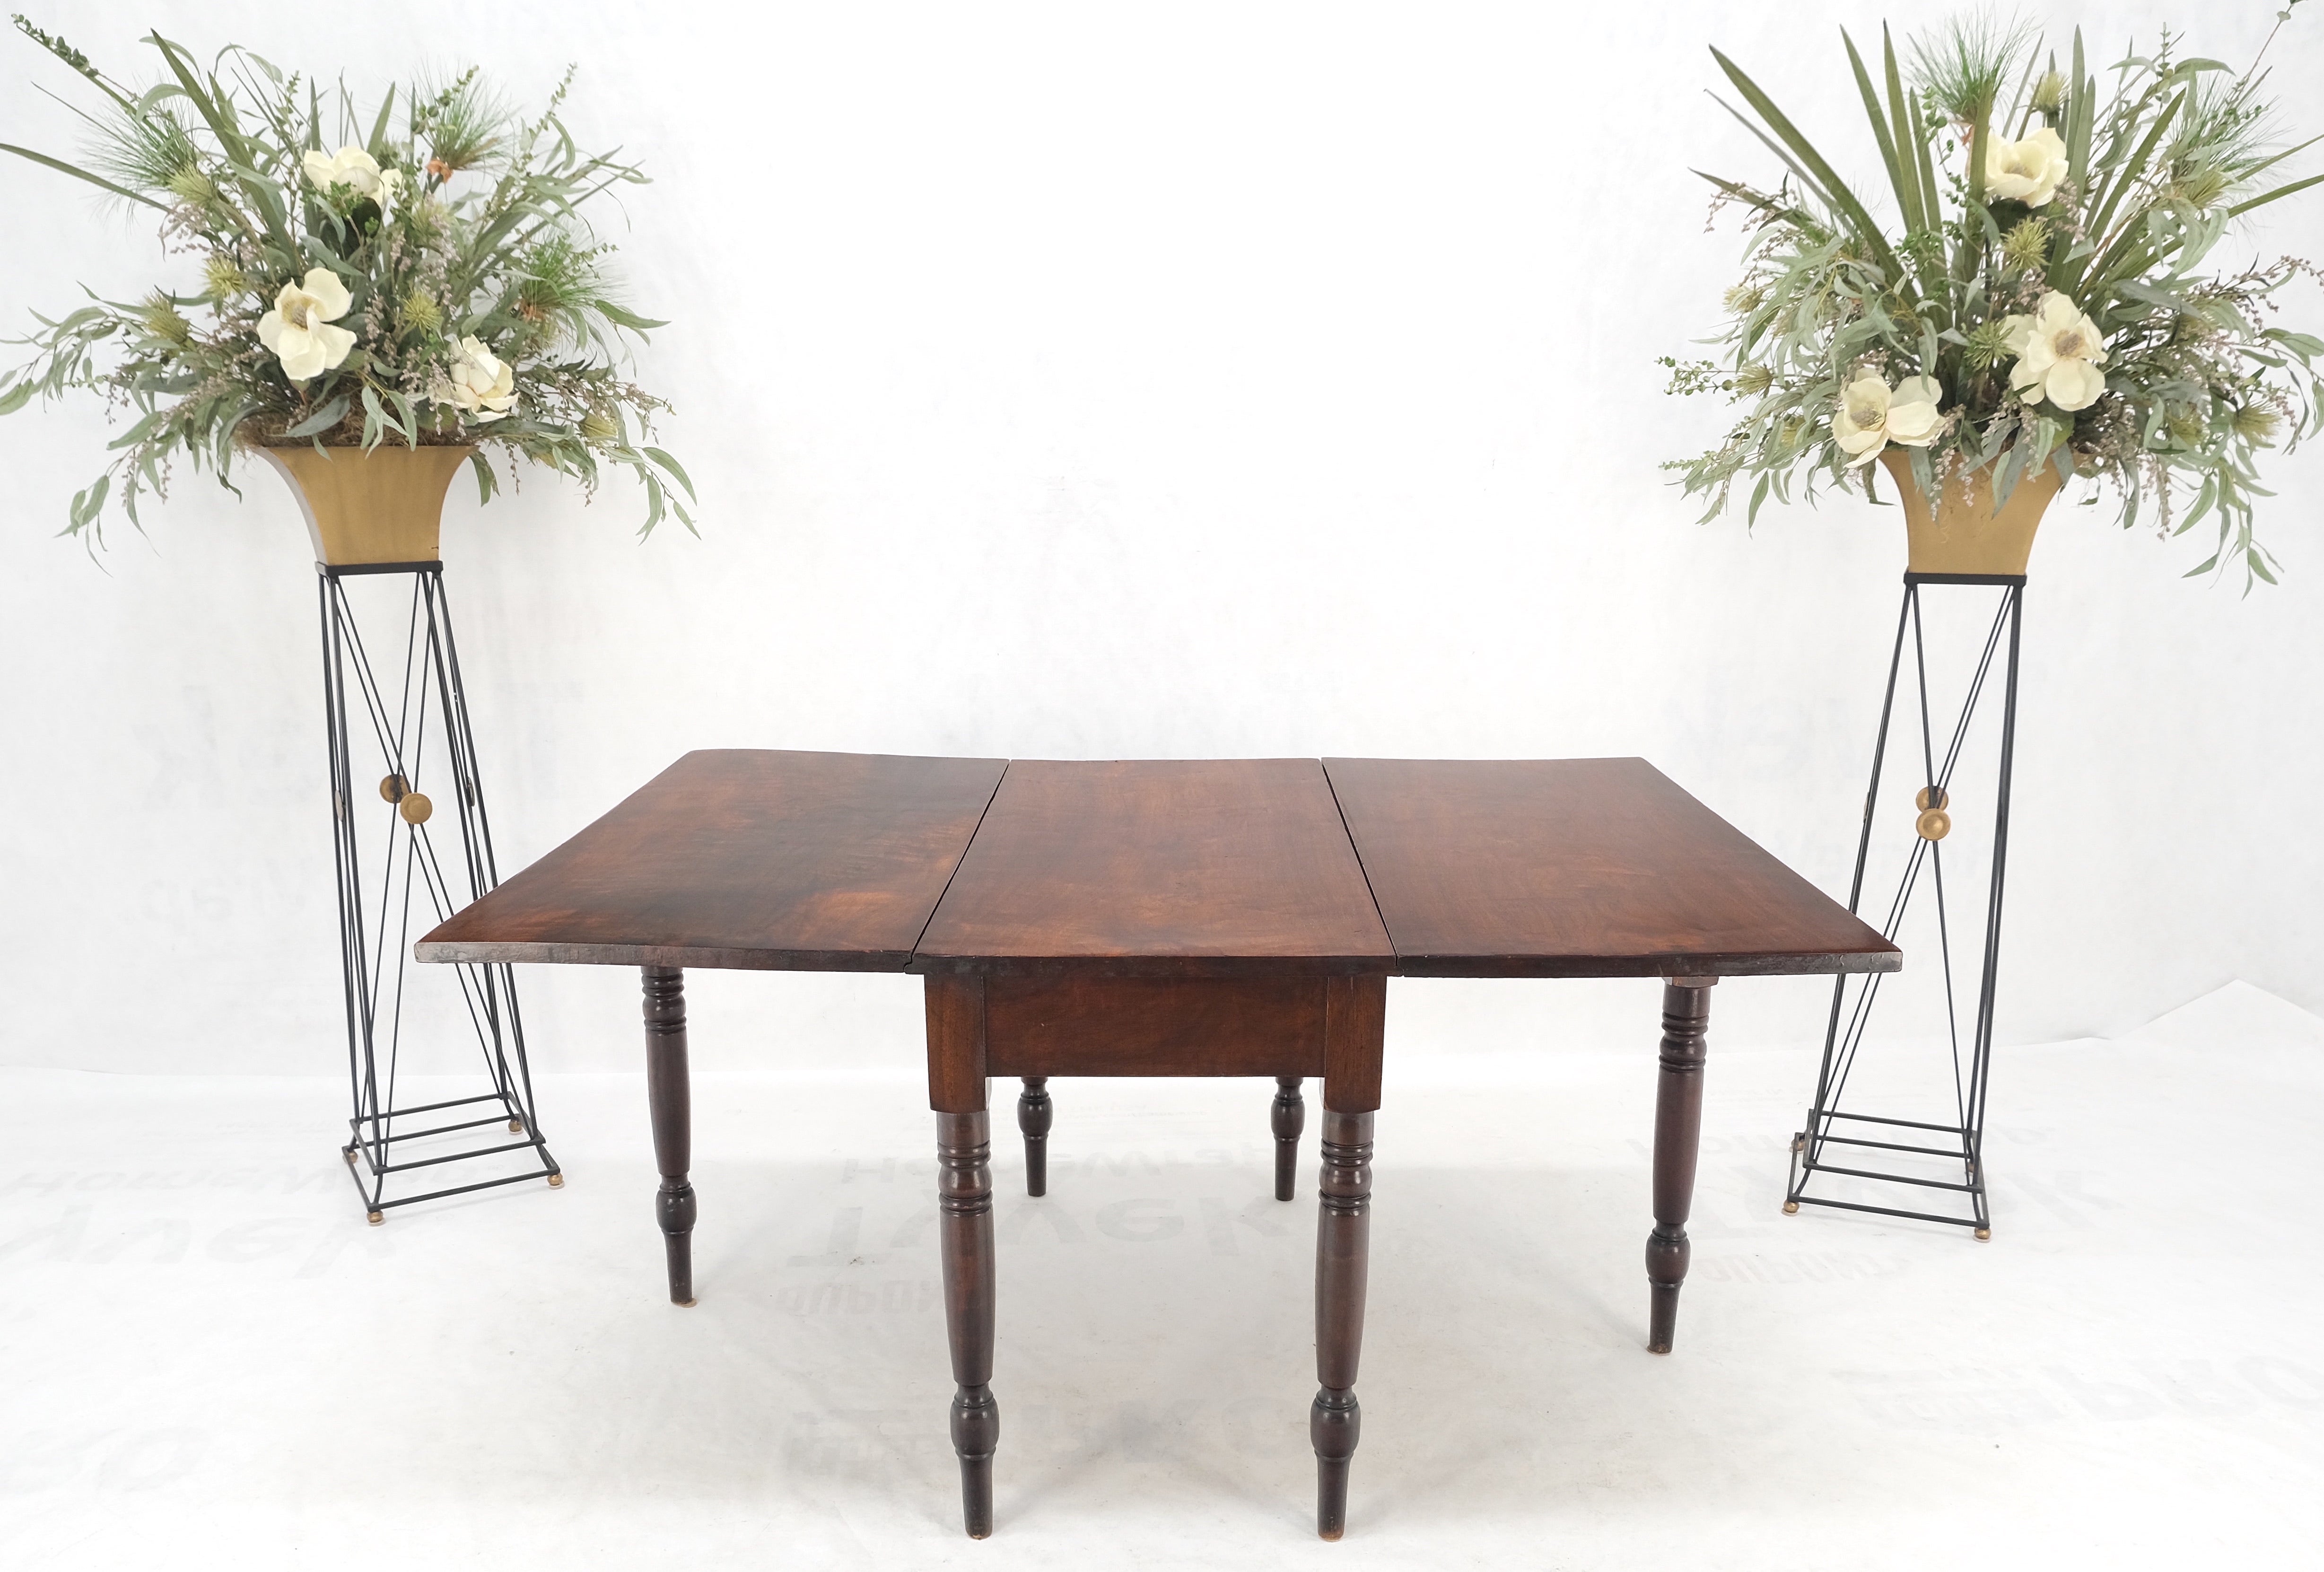 Solid Walnut Board Antique Drop Leaf Gate leg Dining Center Console Table Clean! 
Stunning antique amber tone patinated solid walnut boards!
2 x 21 inchdrop leaves
total table length equals 99 inches across.